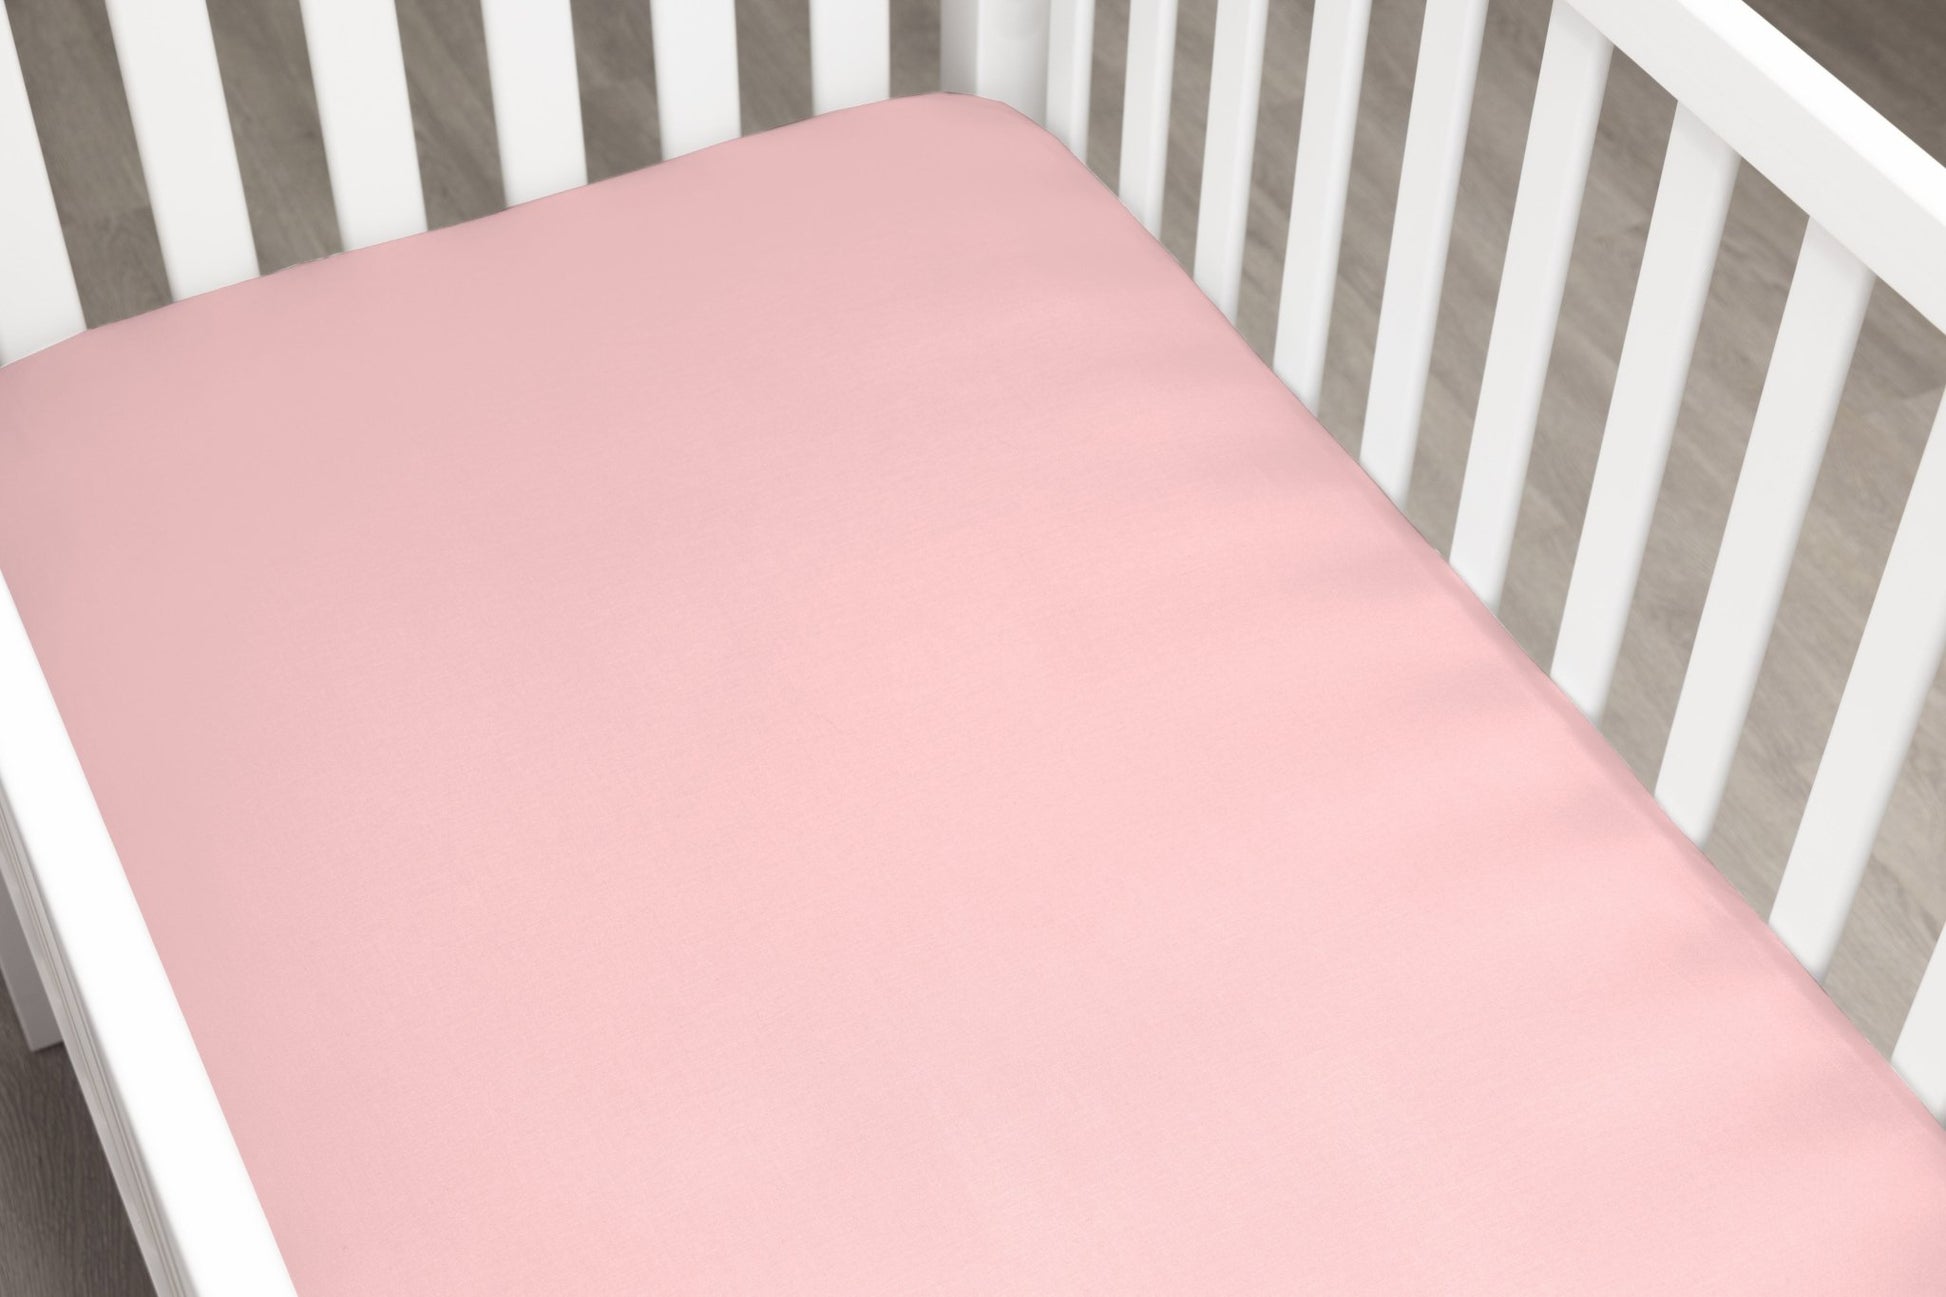 Solid Crystal Pink Crib Sheet - New Arrivals Inc